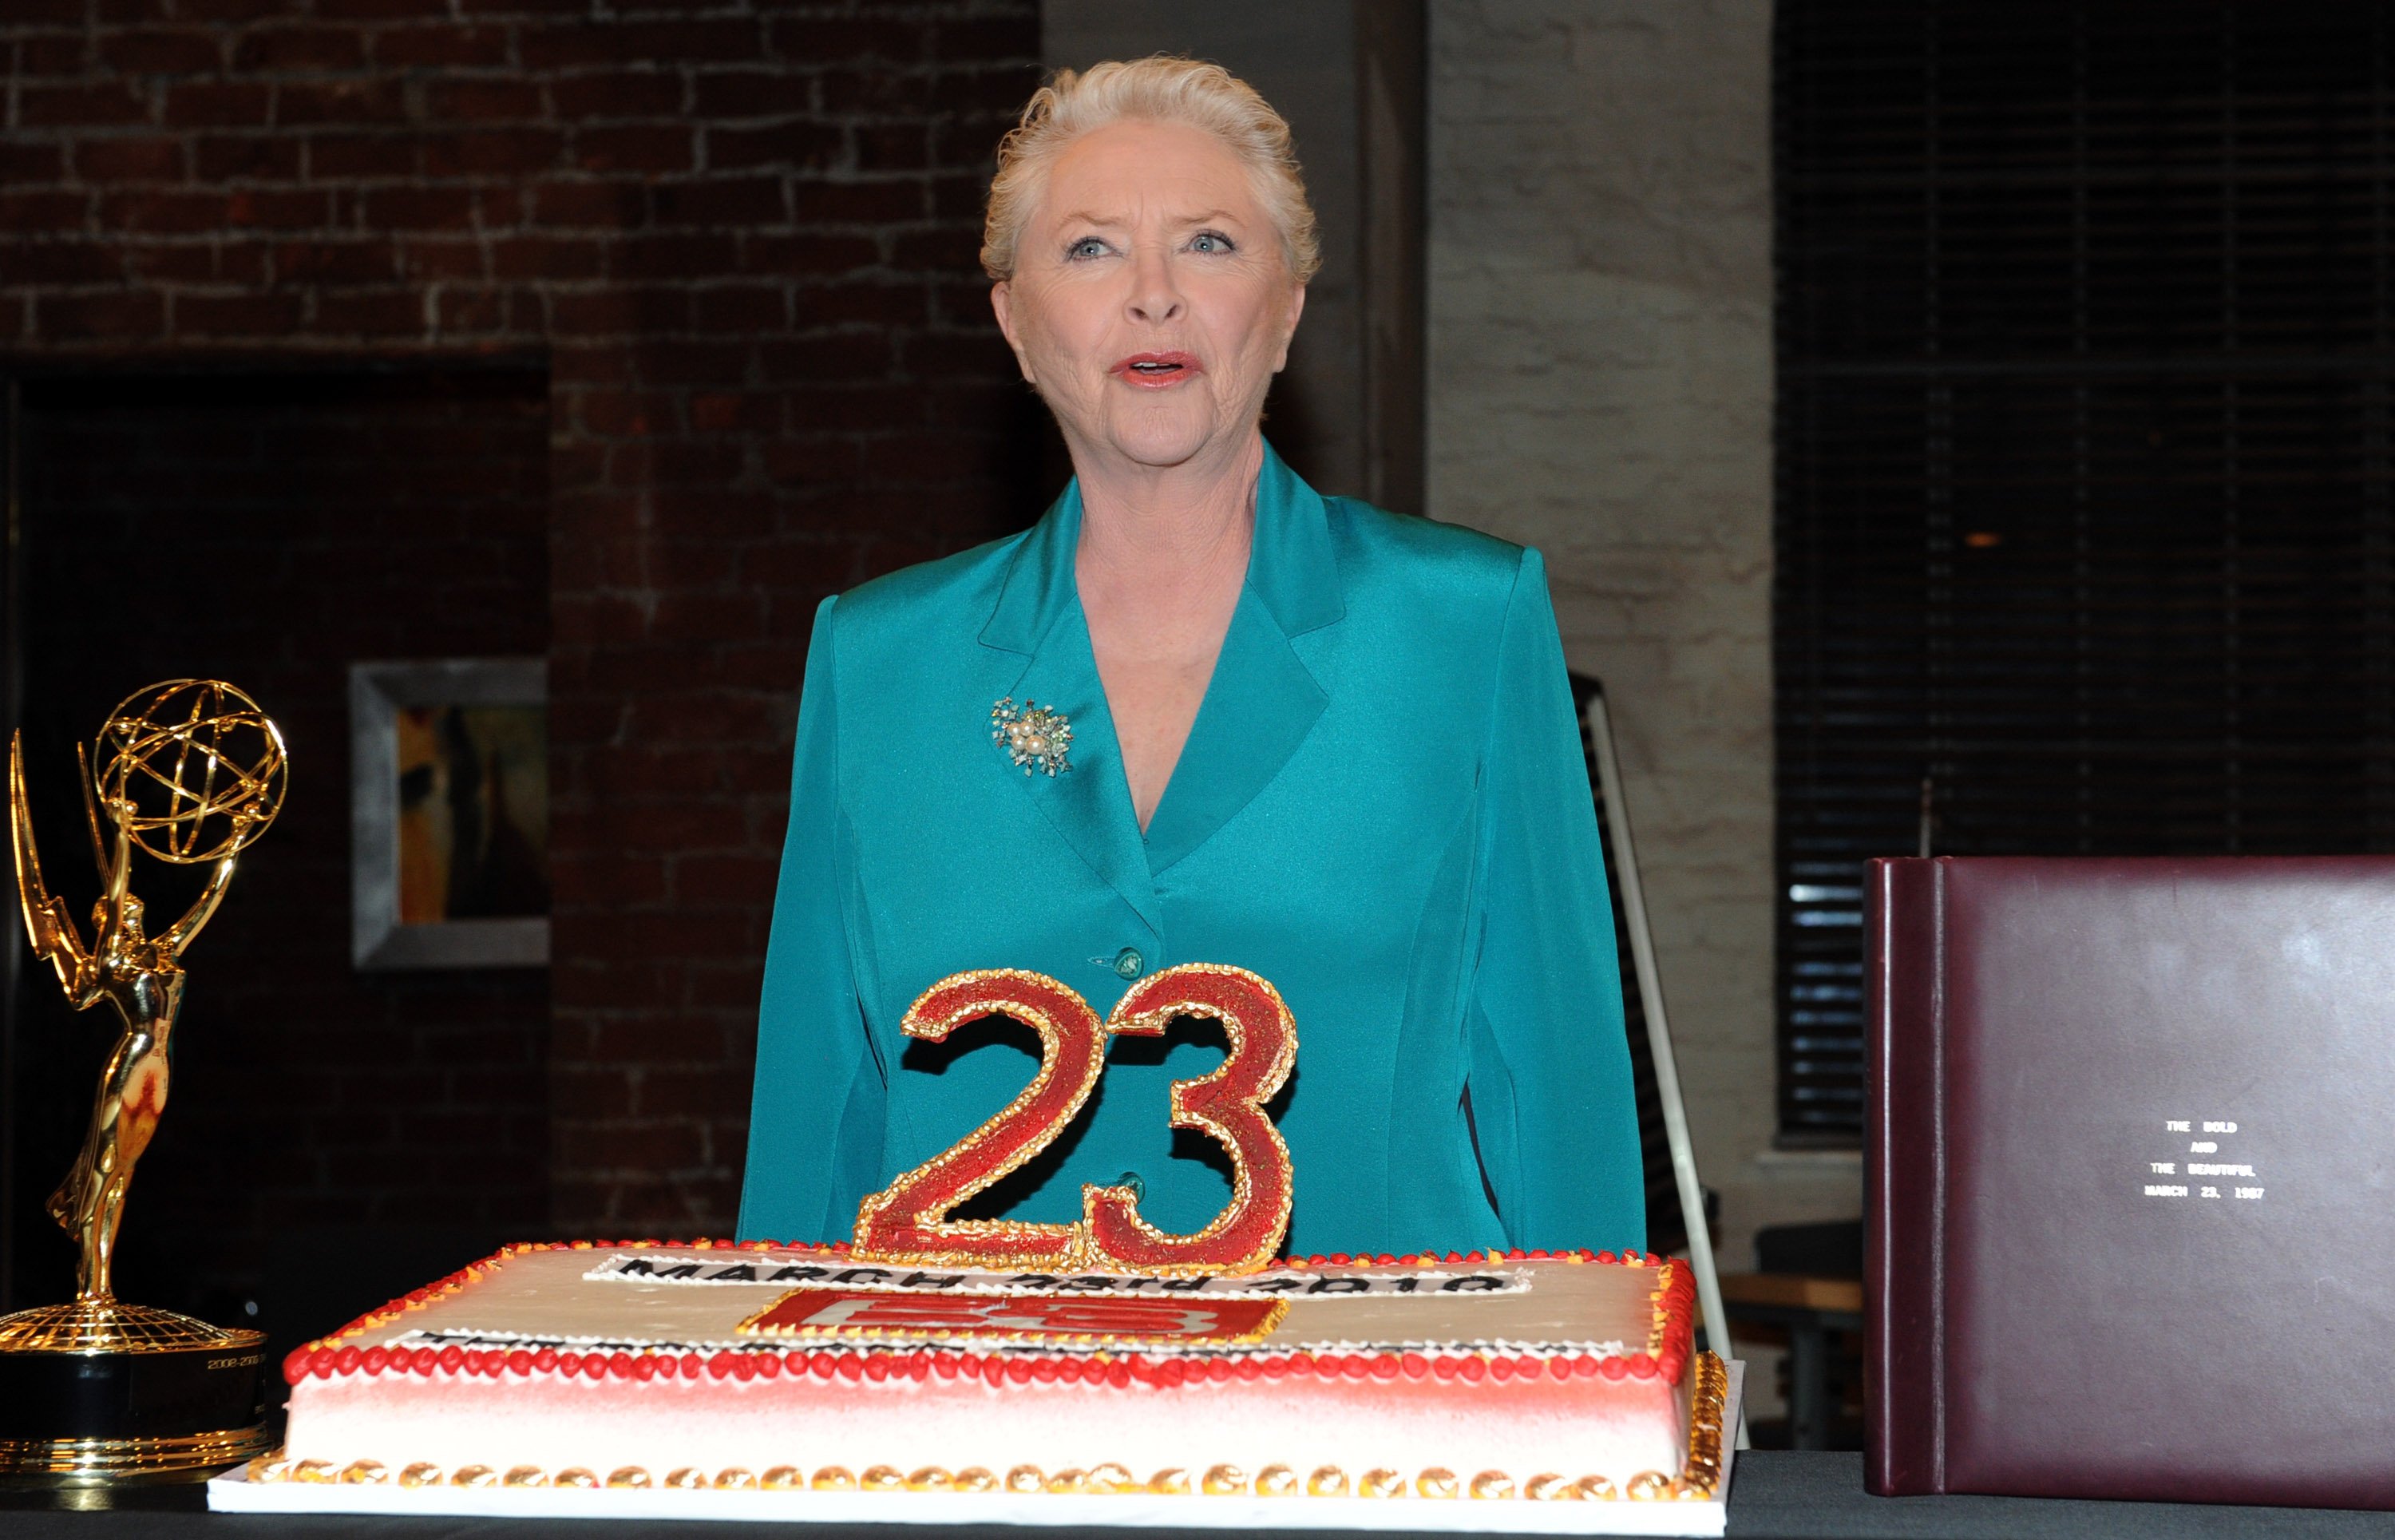 'The Bold and the Beautiful' star Susan Flannery in a blue blouse poses in front of a cake.